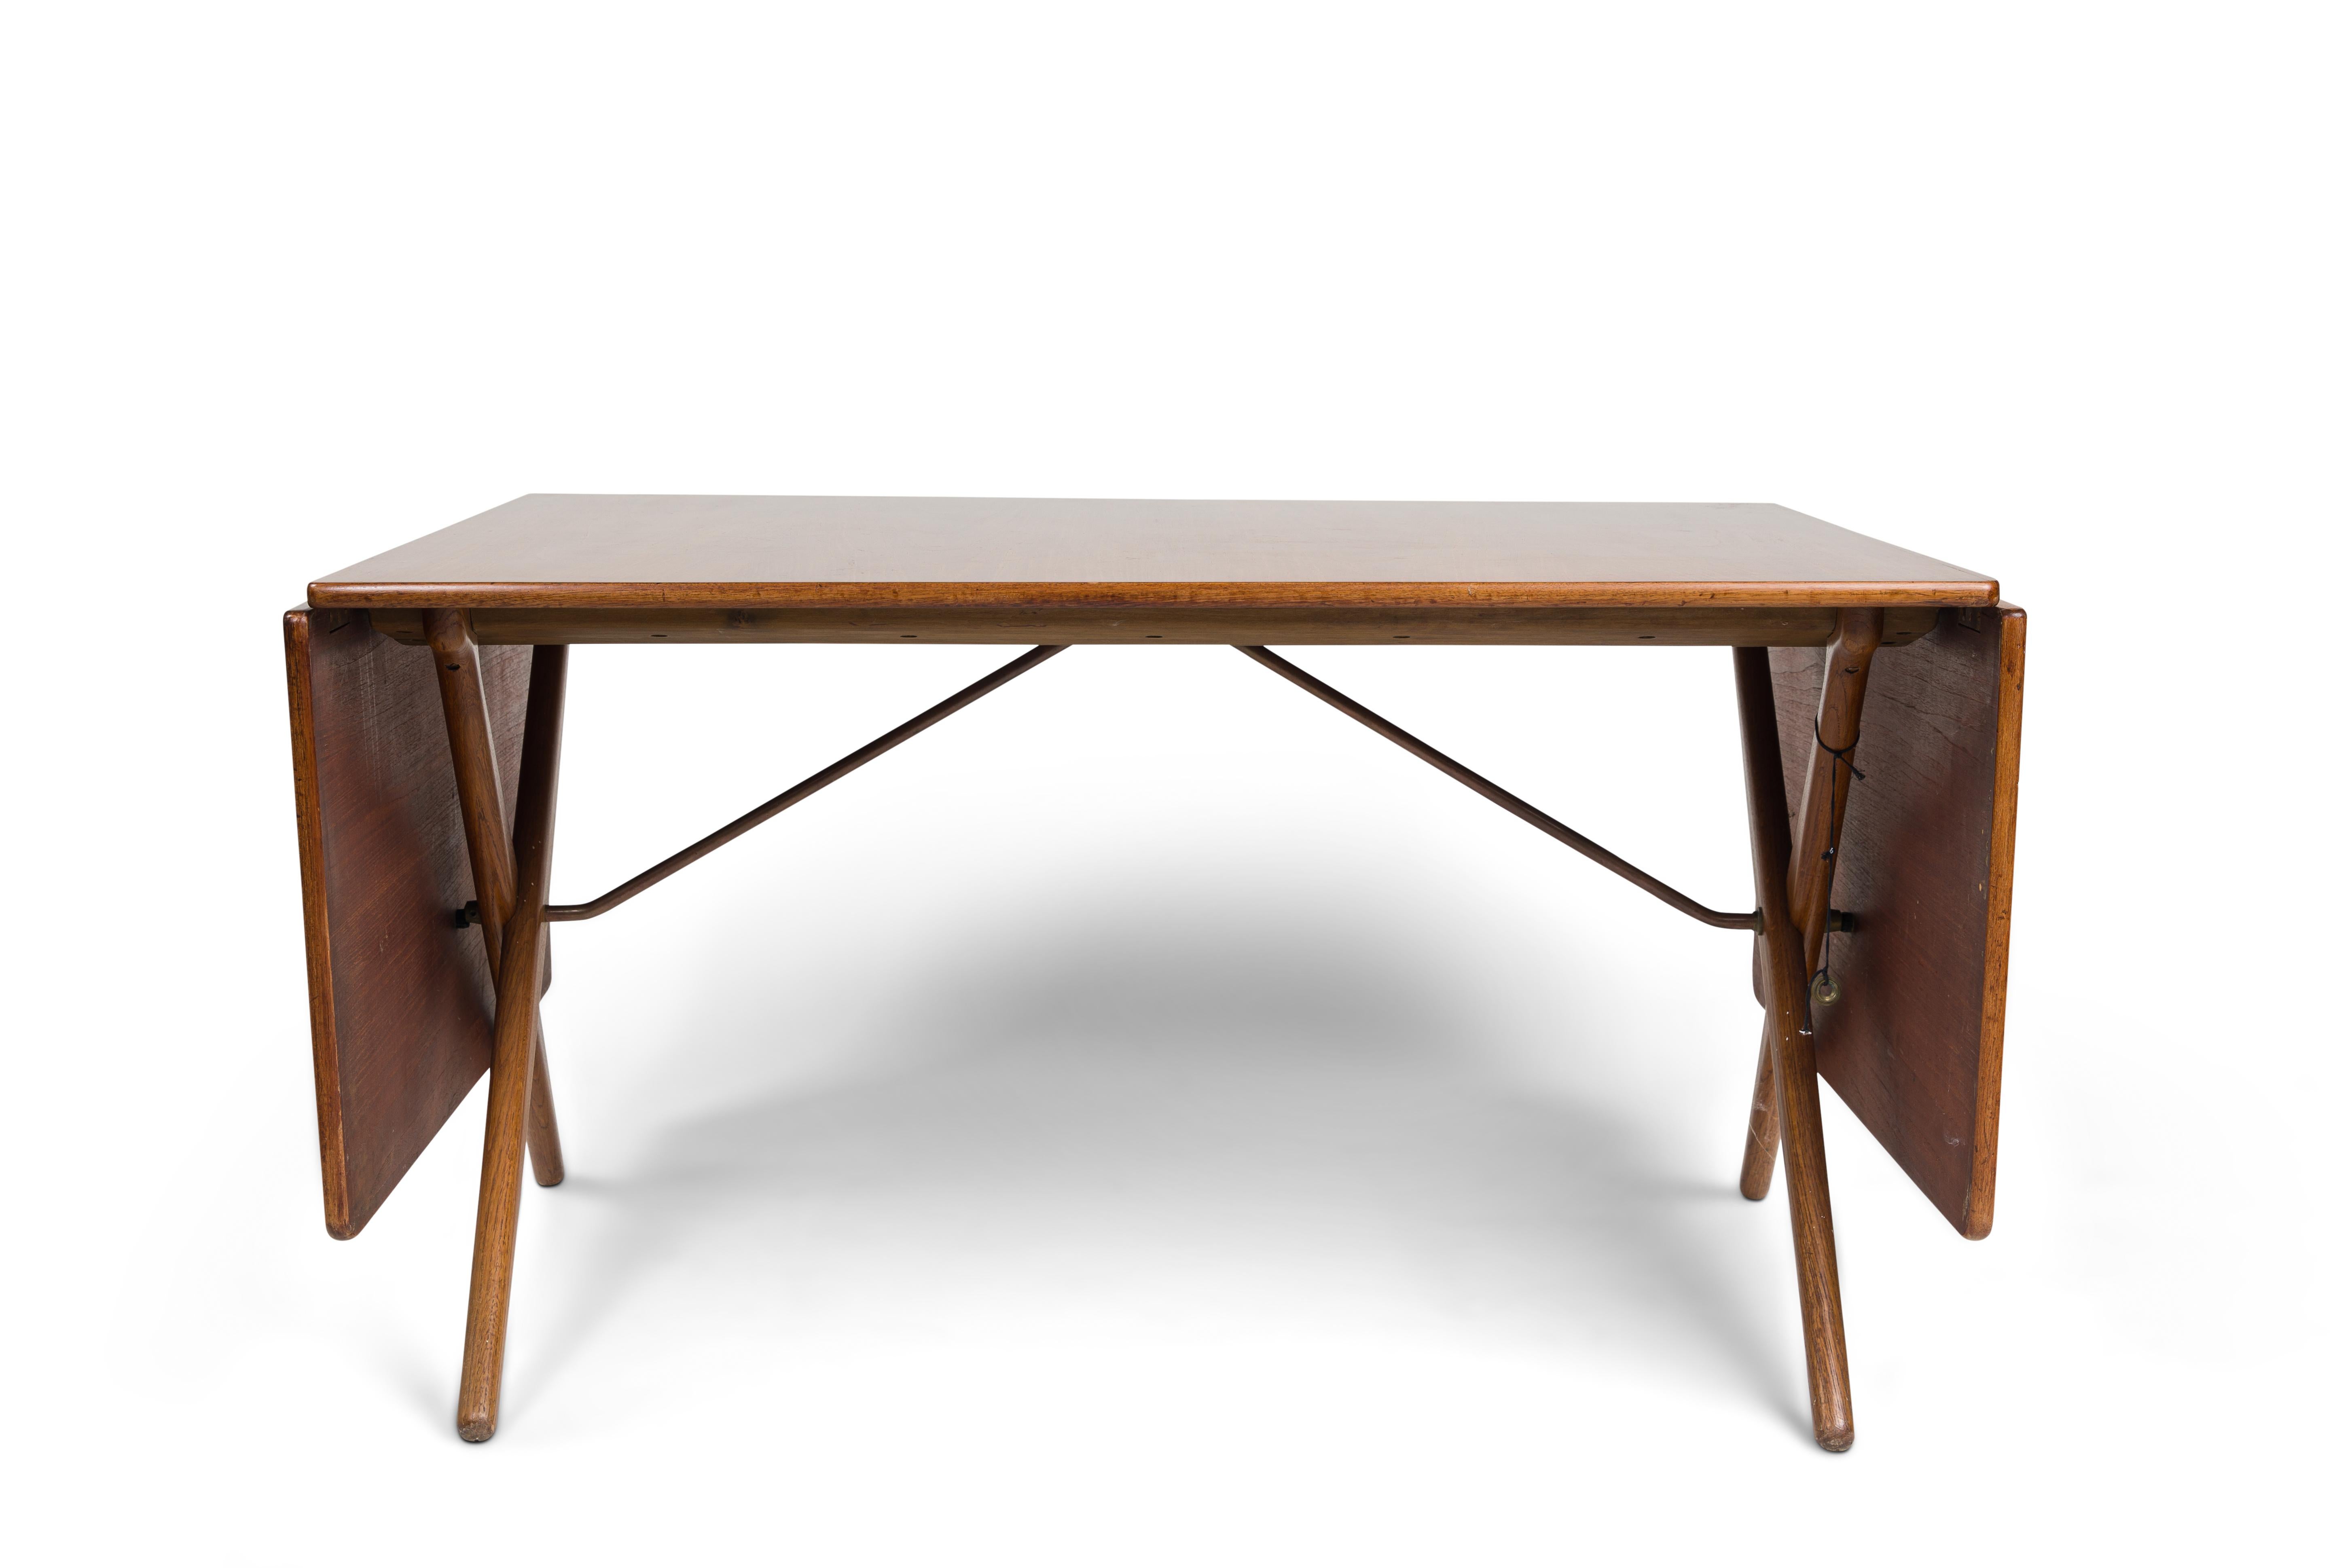 Hans. J. Wegner foldable dining table, model AT304.
Top with varnished teak veneer, with two drop leaves, oak crossed legs and brass struts. Produced by Andreas Tuck with maker's stamp.
Measures: H. 72, L. 128 / 228 W. 86 cm.
Update: the table